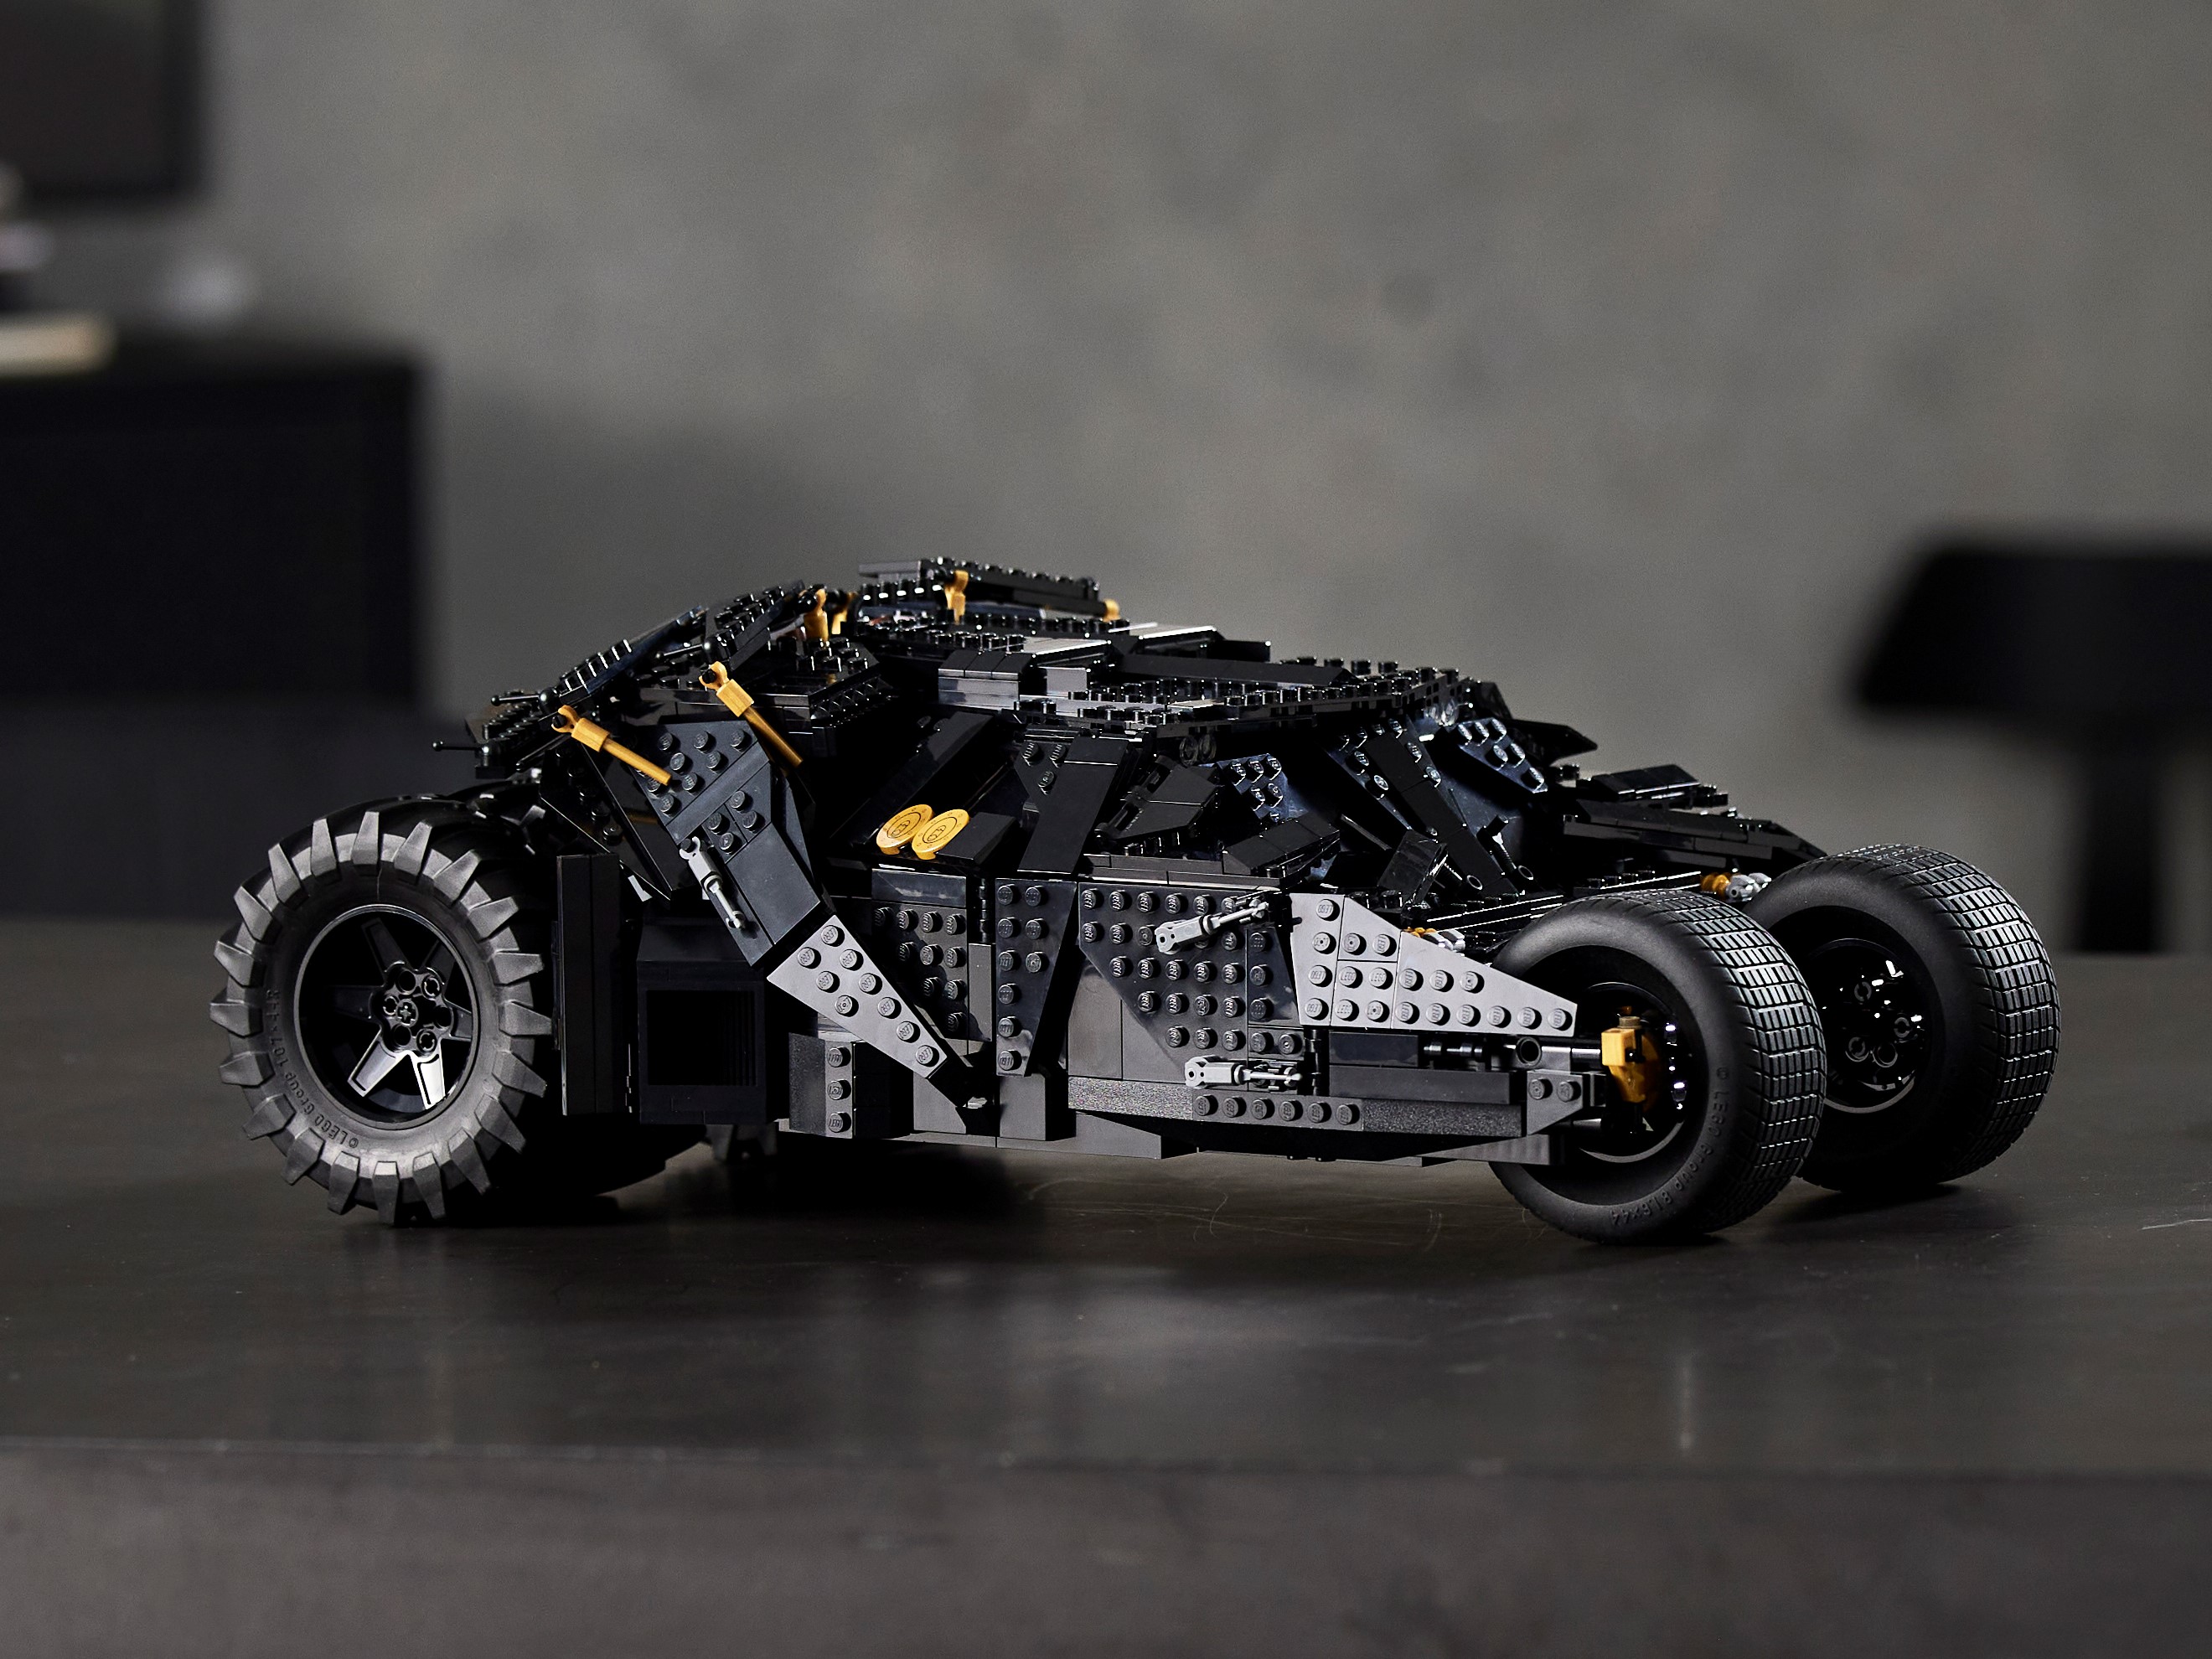 Batmobile™ Tumbler 76240 | DC | Buy online at the Official LEGO